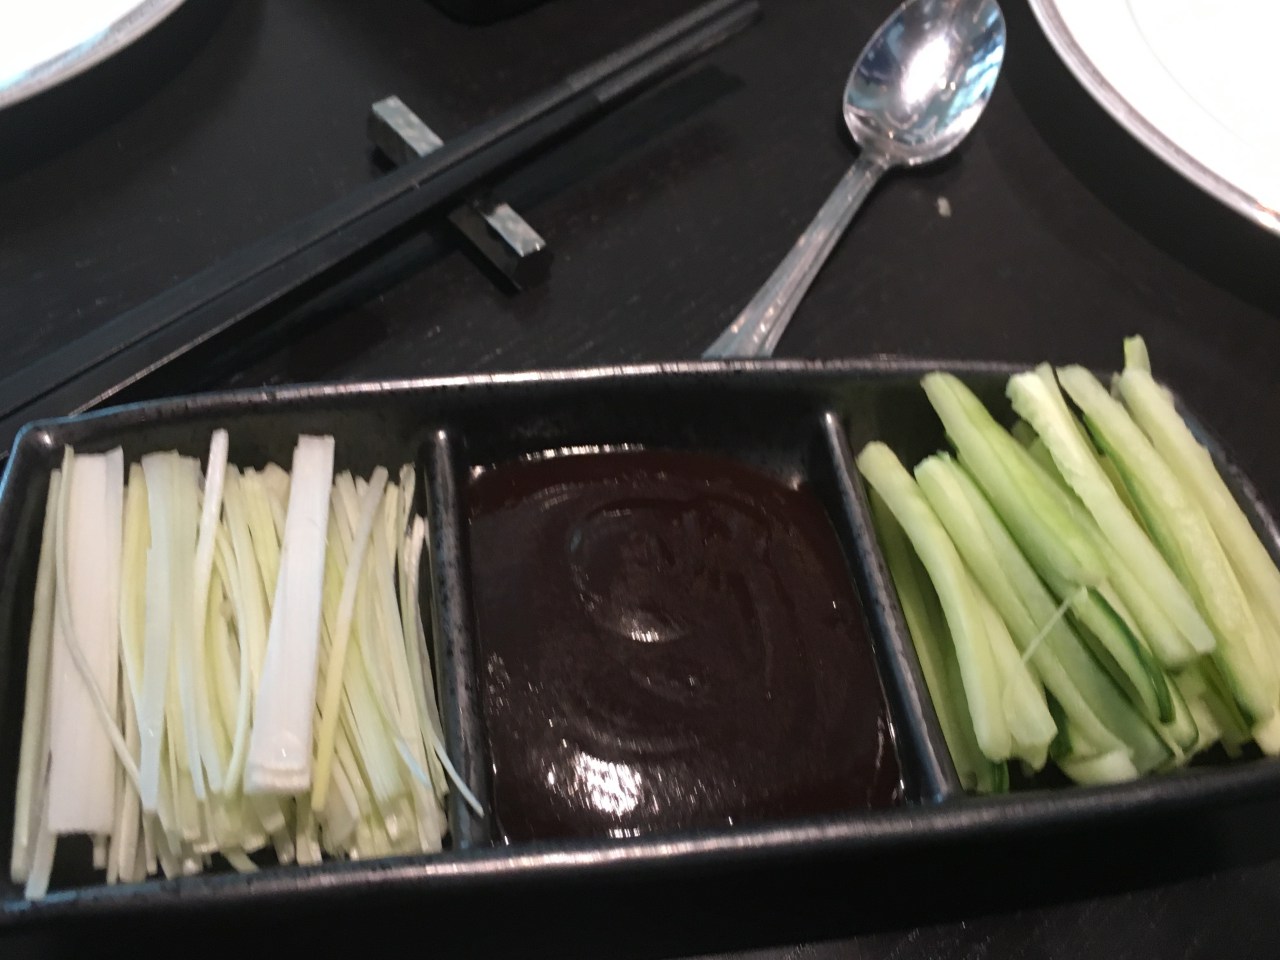 Plum Sauce and Scallions, Hutong New York Review